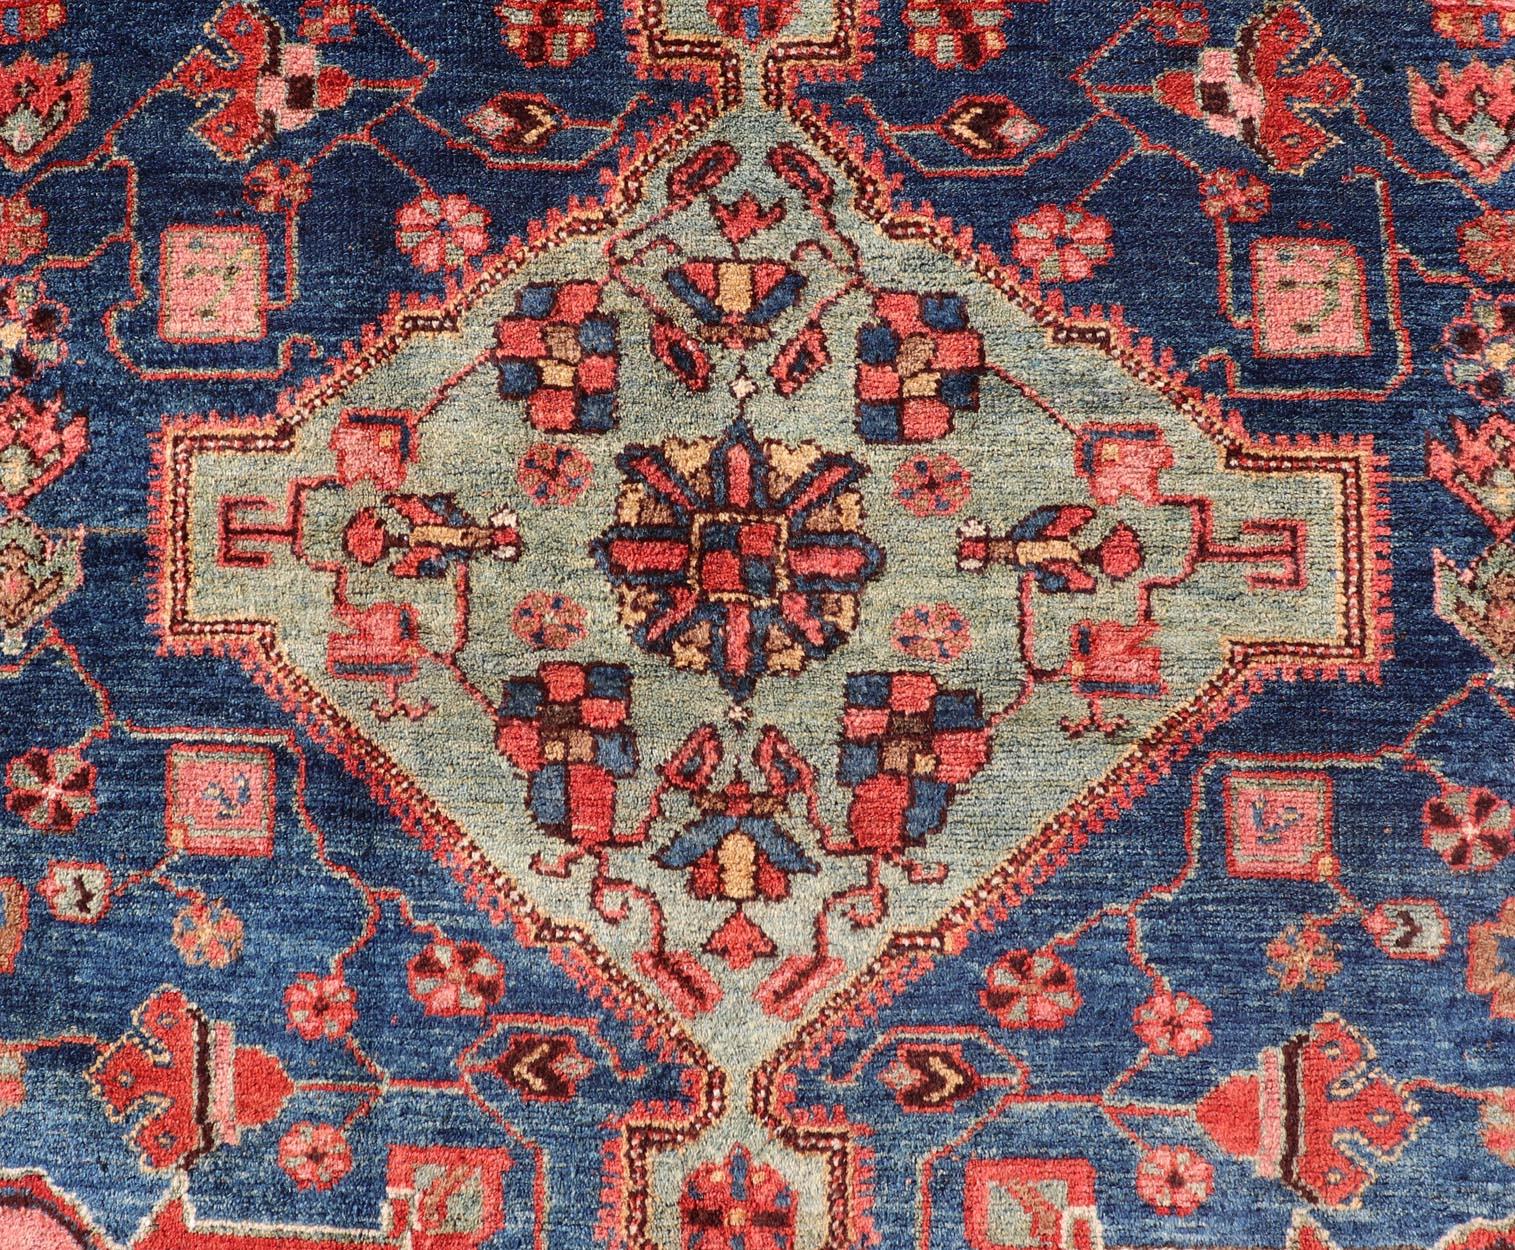 Antique Persian Karajeh Rug with Geometric Medallions in Green, Blue, and Red 4